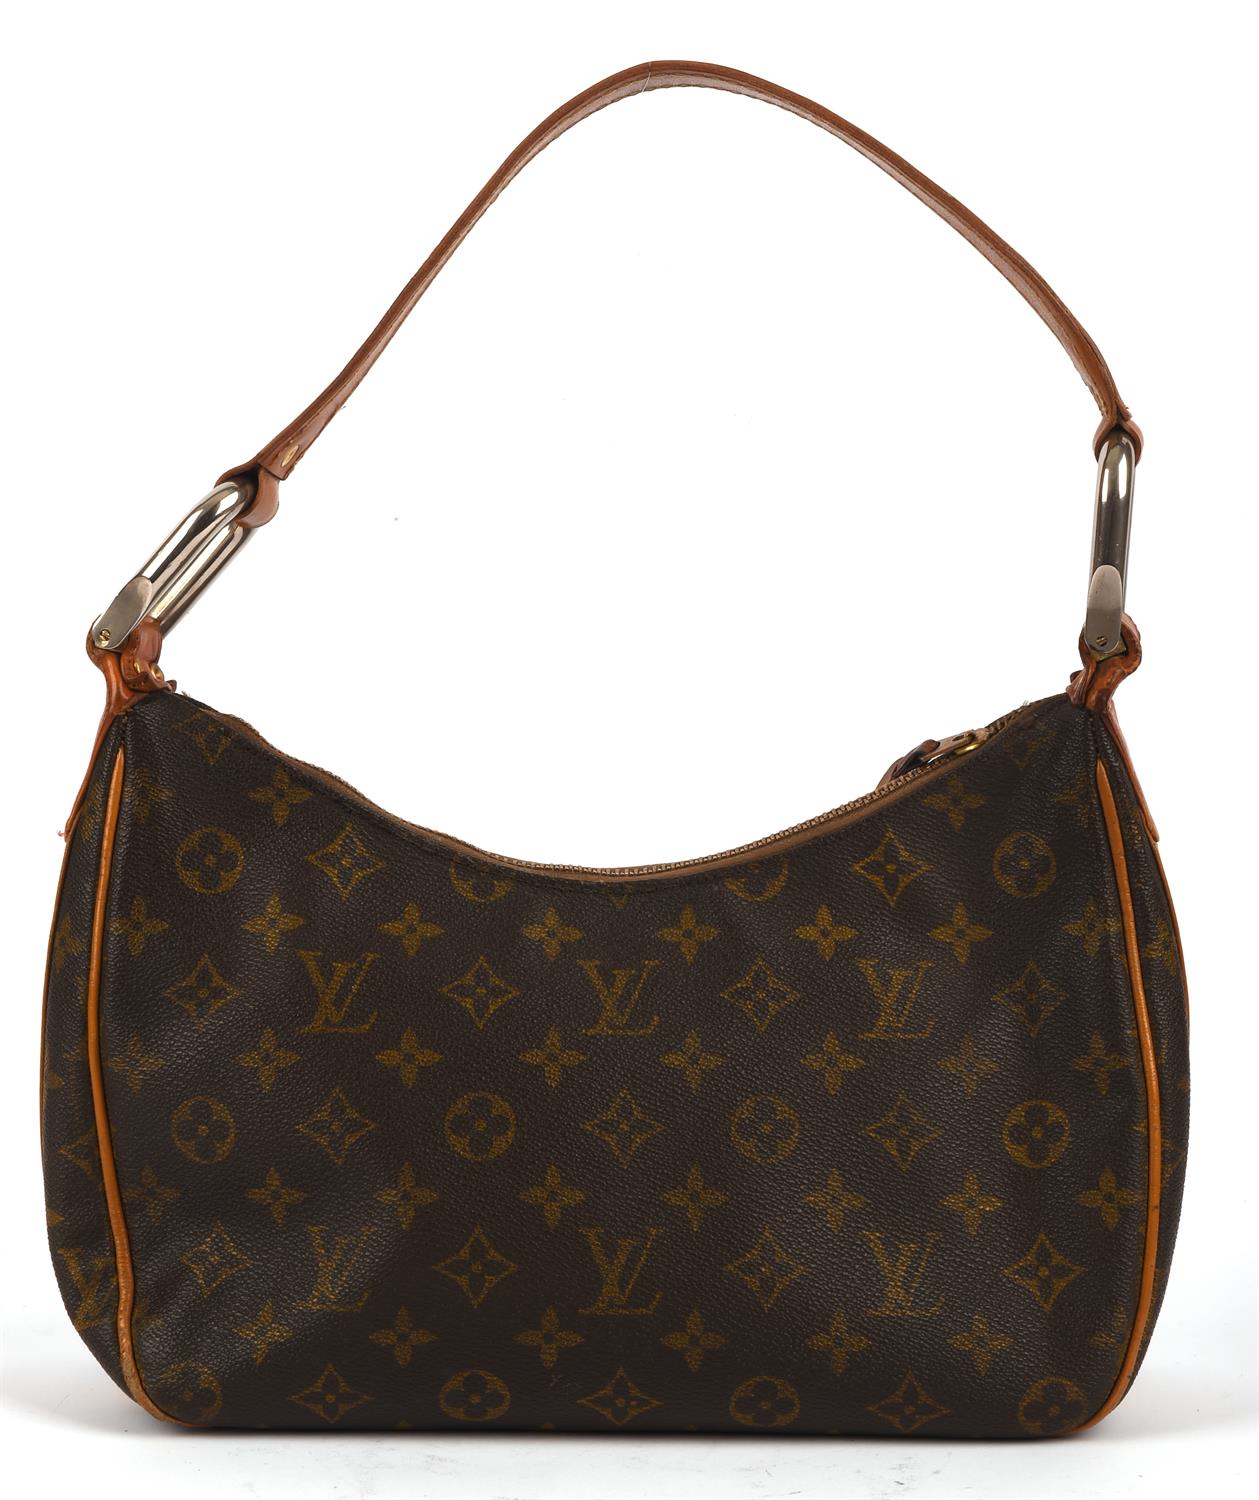 LOUIS VUITTON vintage monogrammed TIKAL style small handbag/ shoulder bag with faded initials AG on - Image 5 of 10